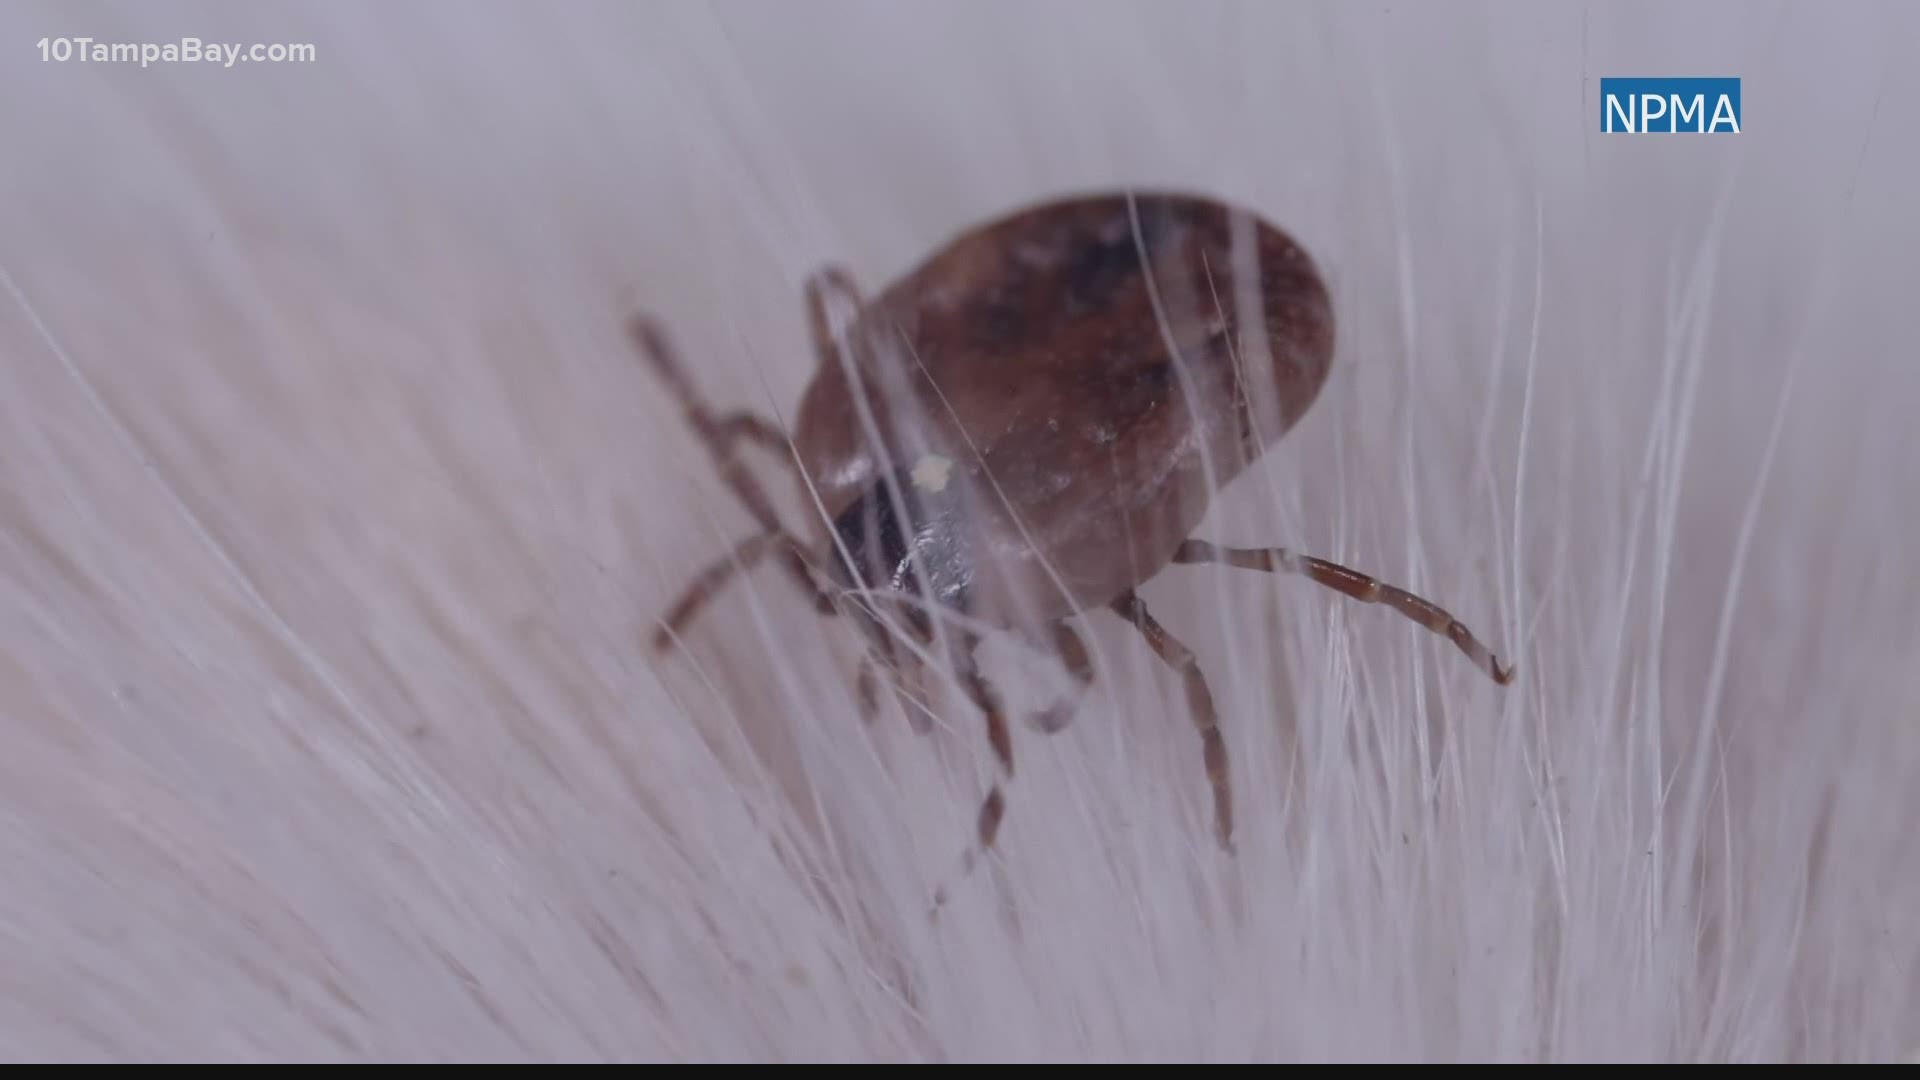 Bad news: Tick season is year-round in Florida because of the warm, hot weather.